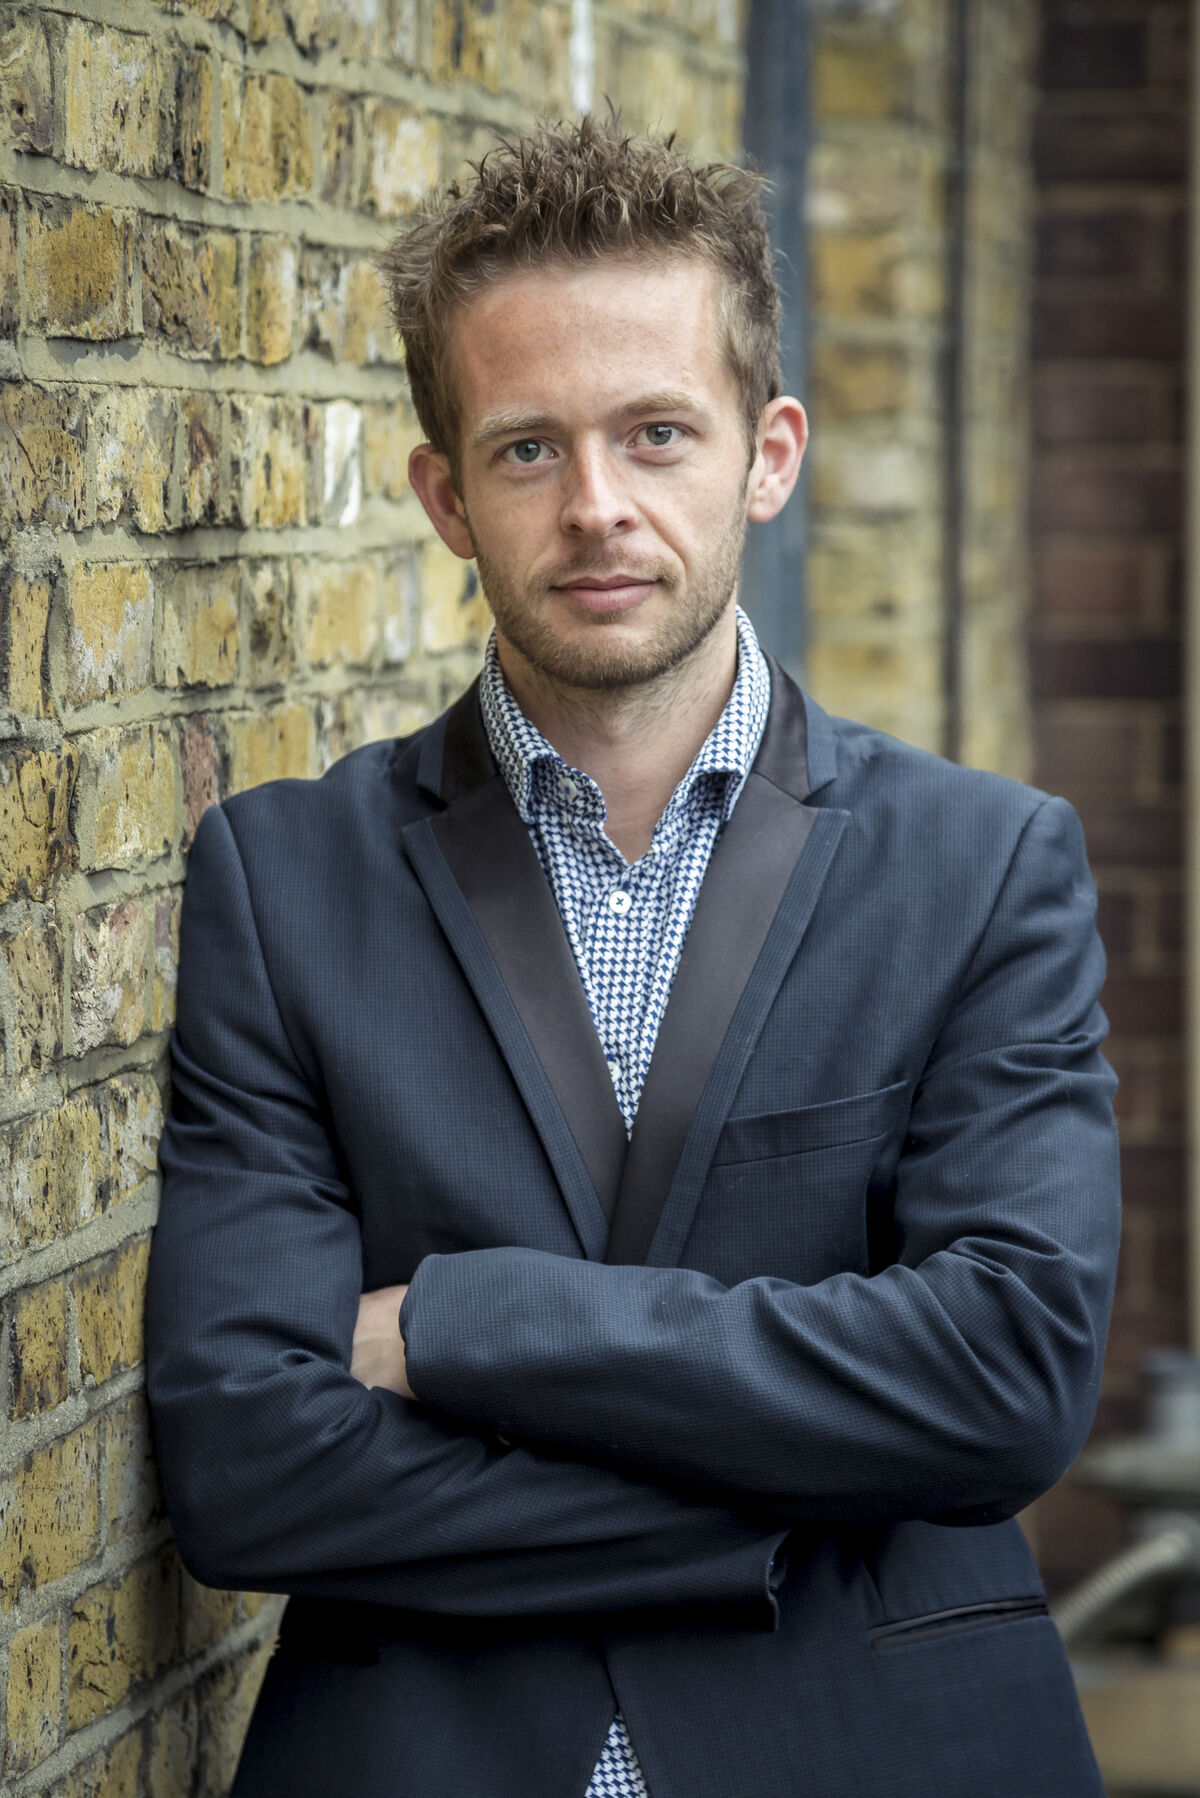 Rupert Worrall, Head of Prints and Editions